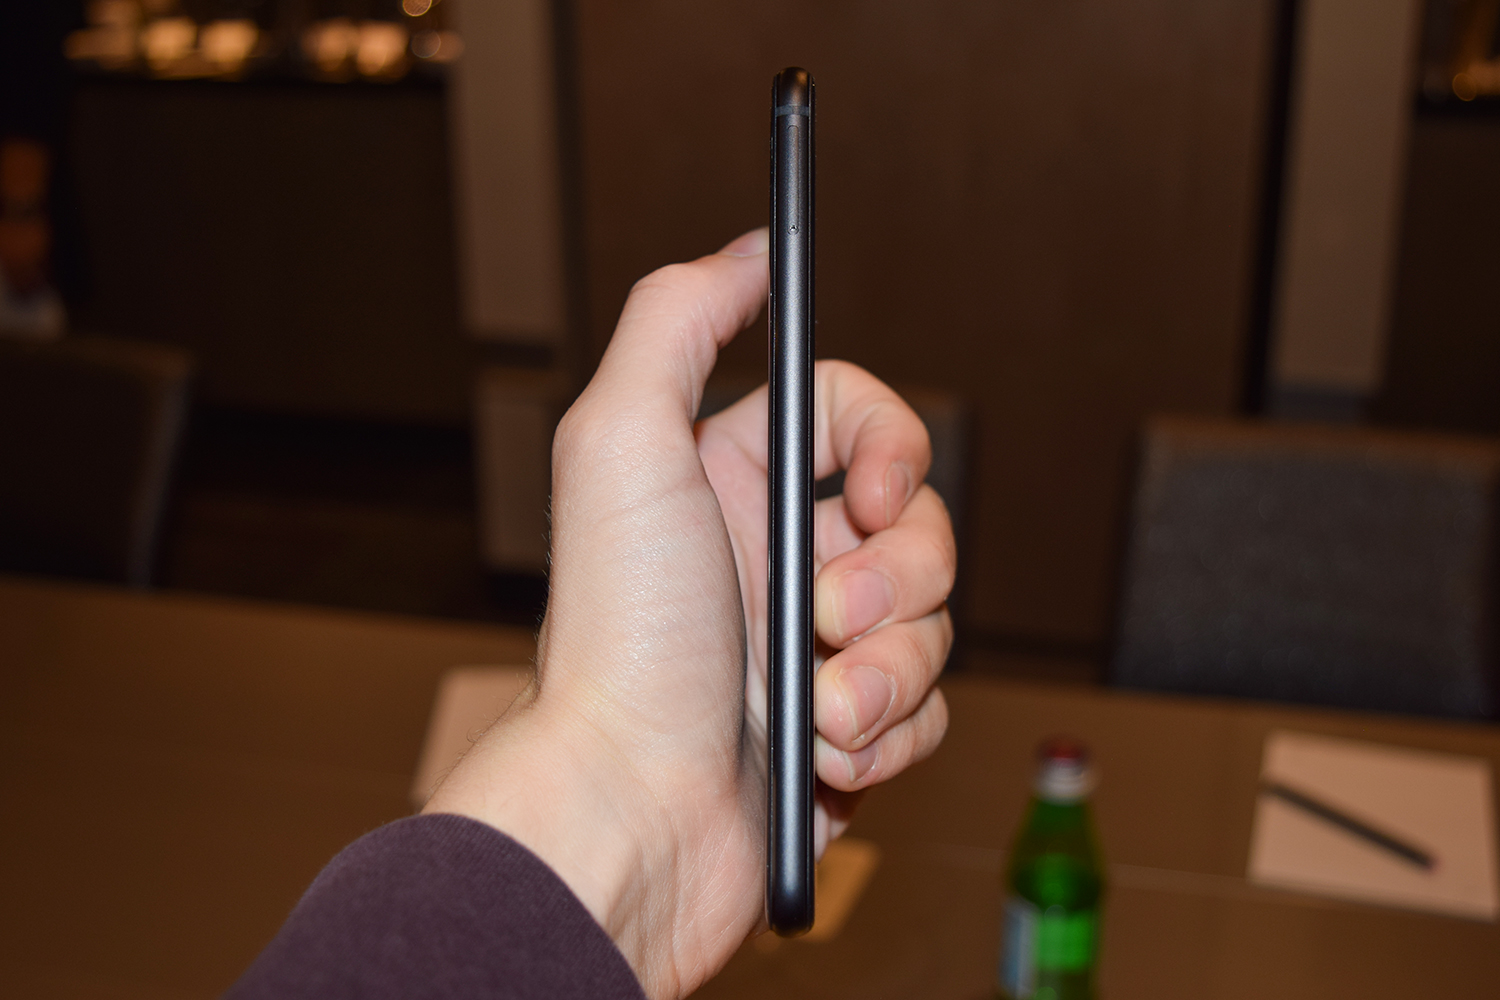 huawei honor 8 hands on